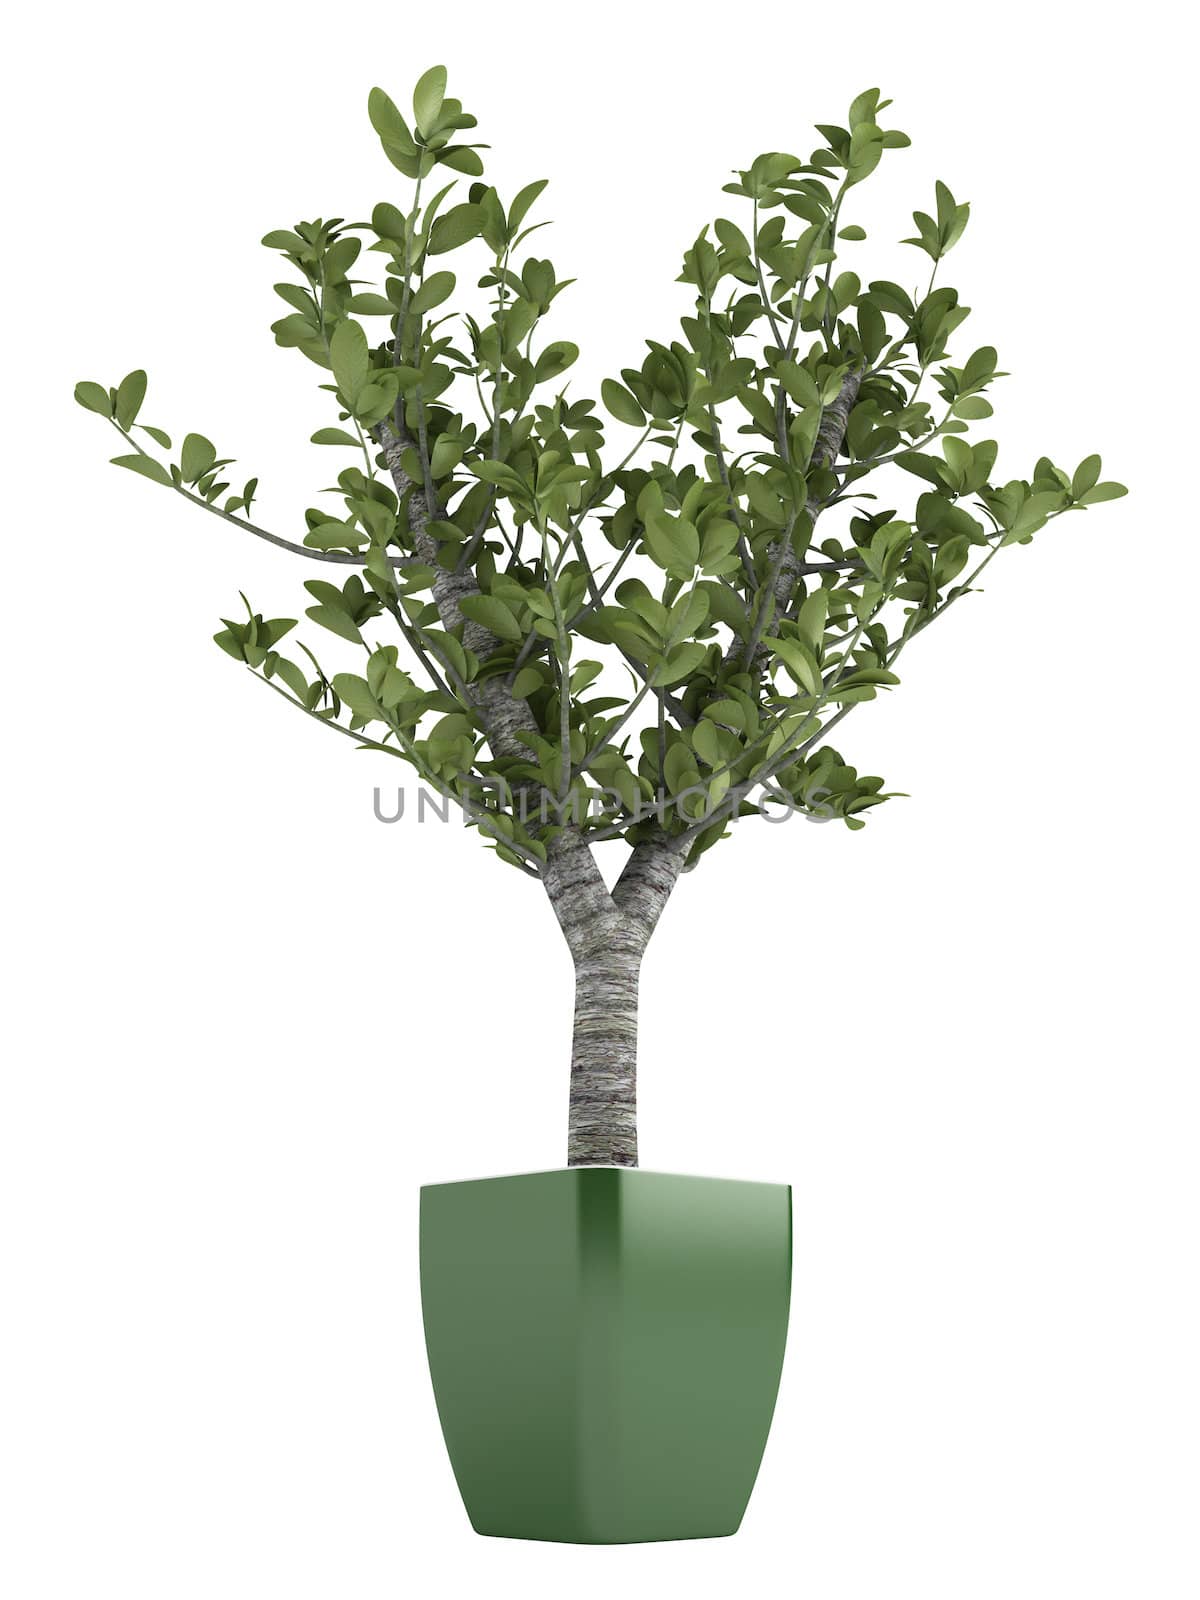 Bonsai tree in a green pot isolated on white background